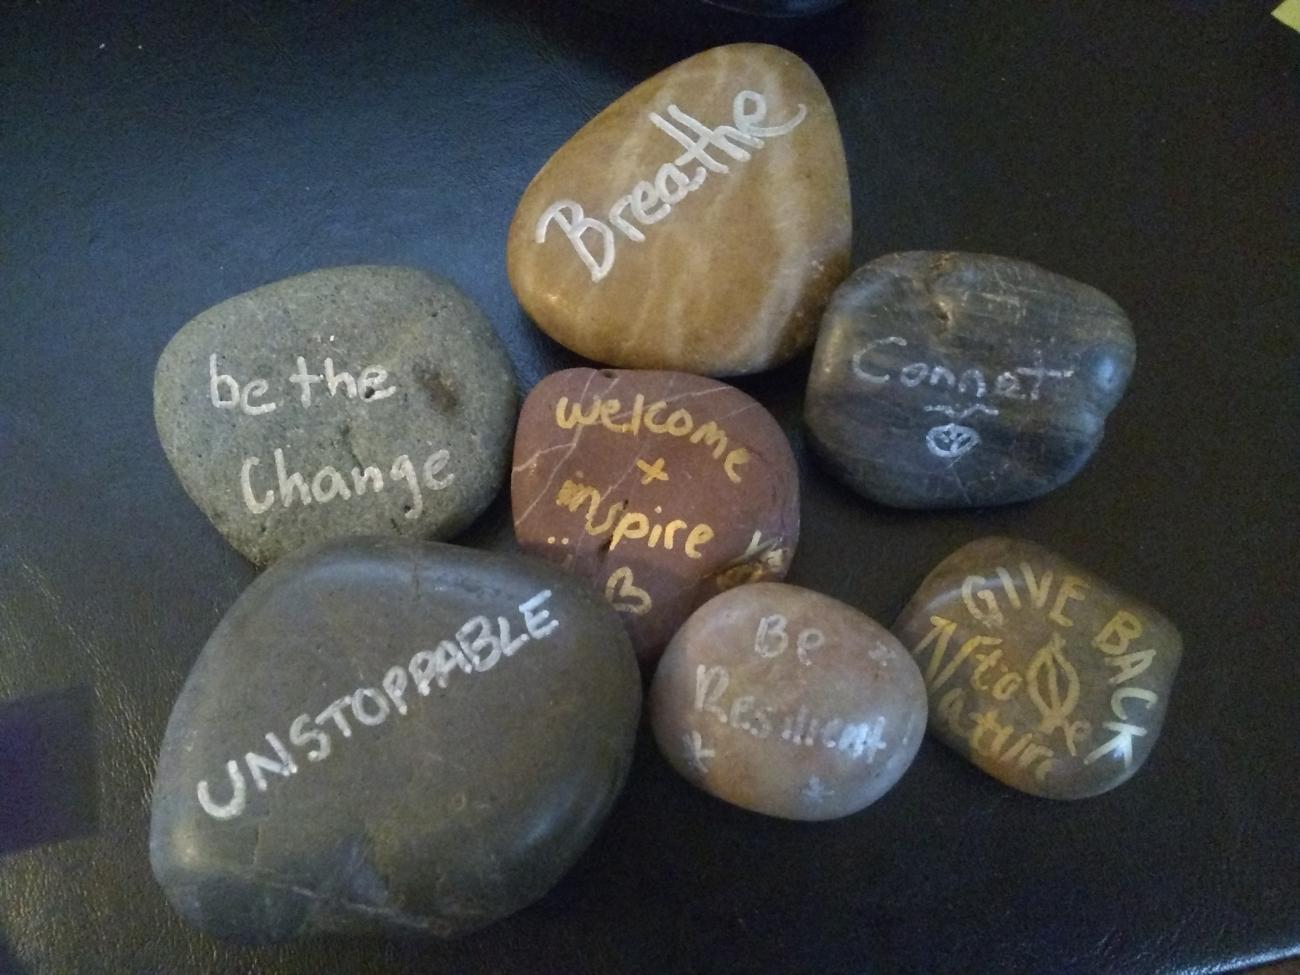 Polished rocks with sayings like "Breathe," "Unstoppable," and "be the change" on them